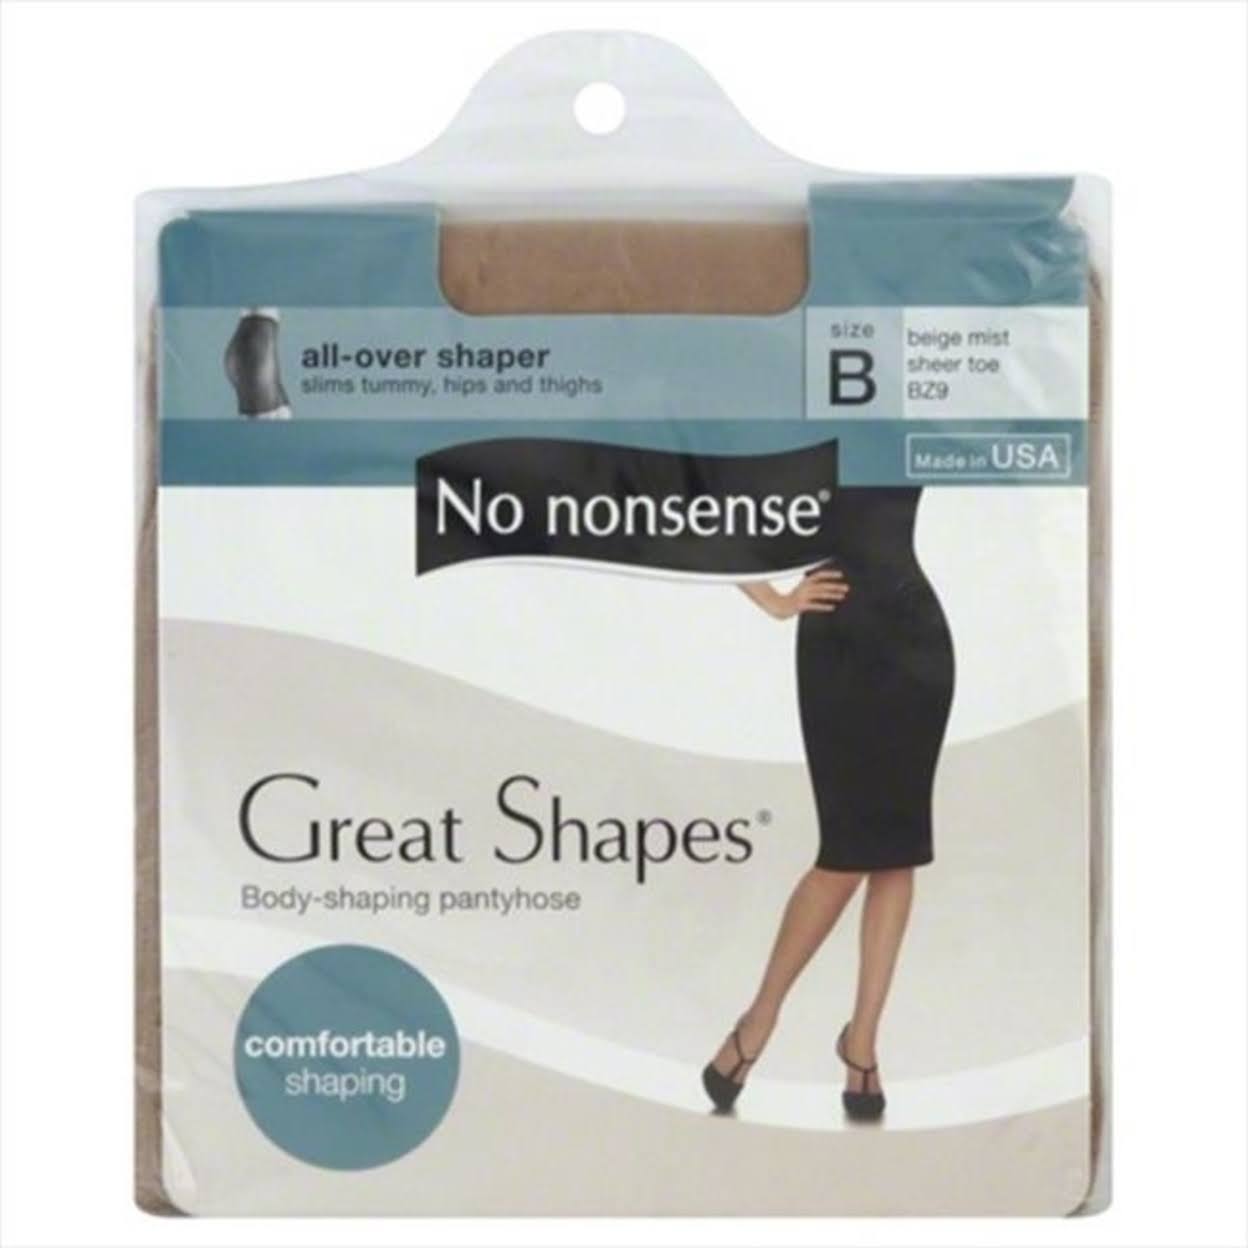 No Nonsense Great Shapes Body Shaping Pantyhose - Size B, Beige Mist